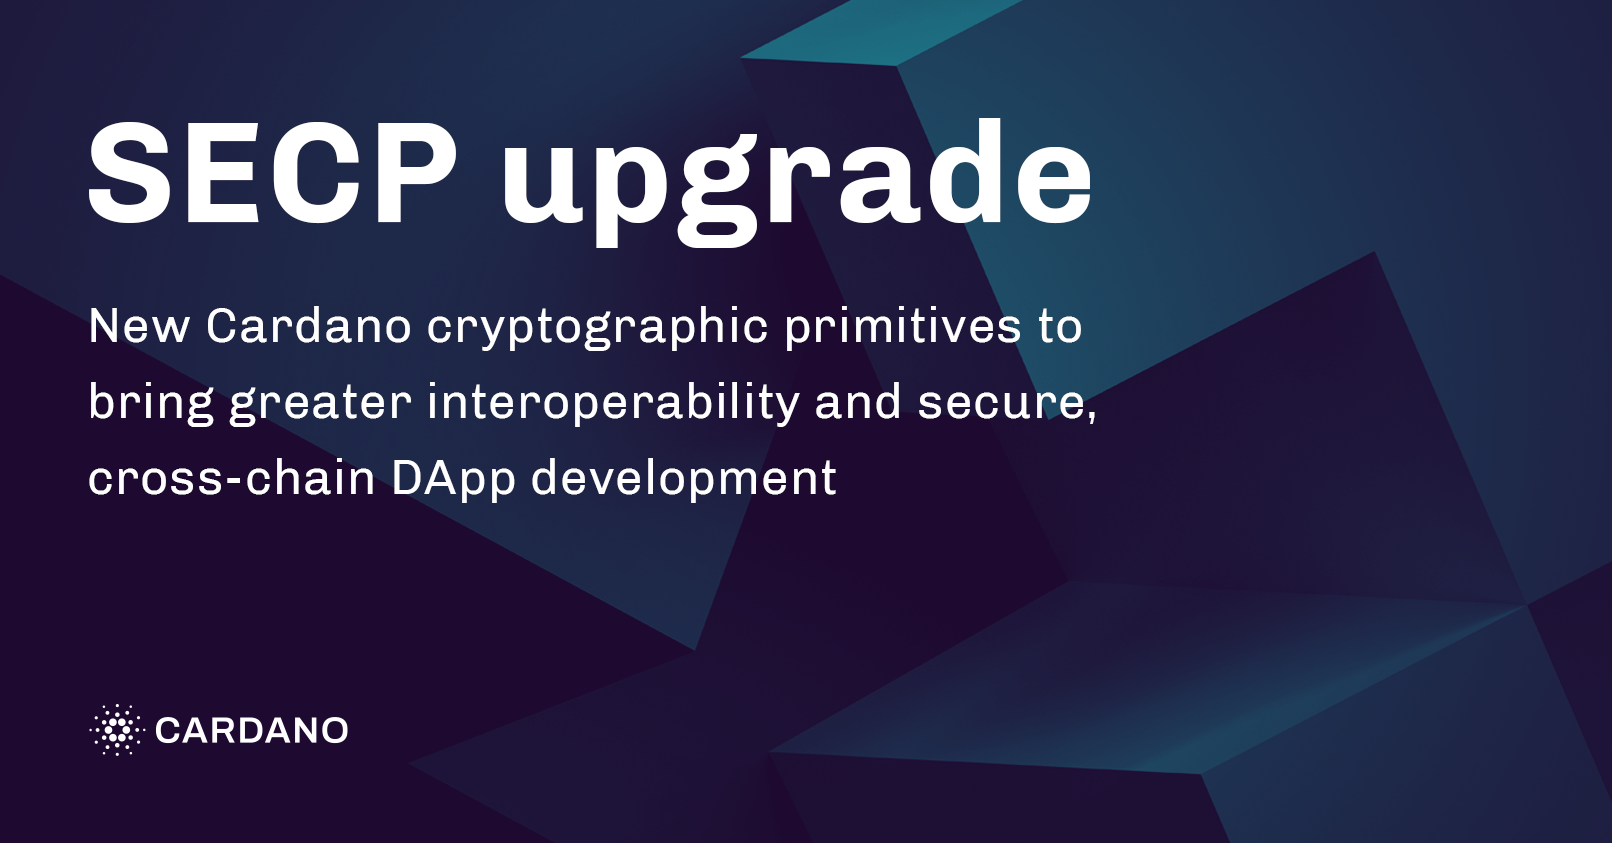 New Cardano cryptographic primitives will bring greater interoperability and secure, cross-chain DApp development